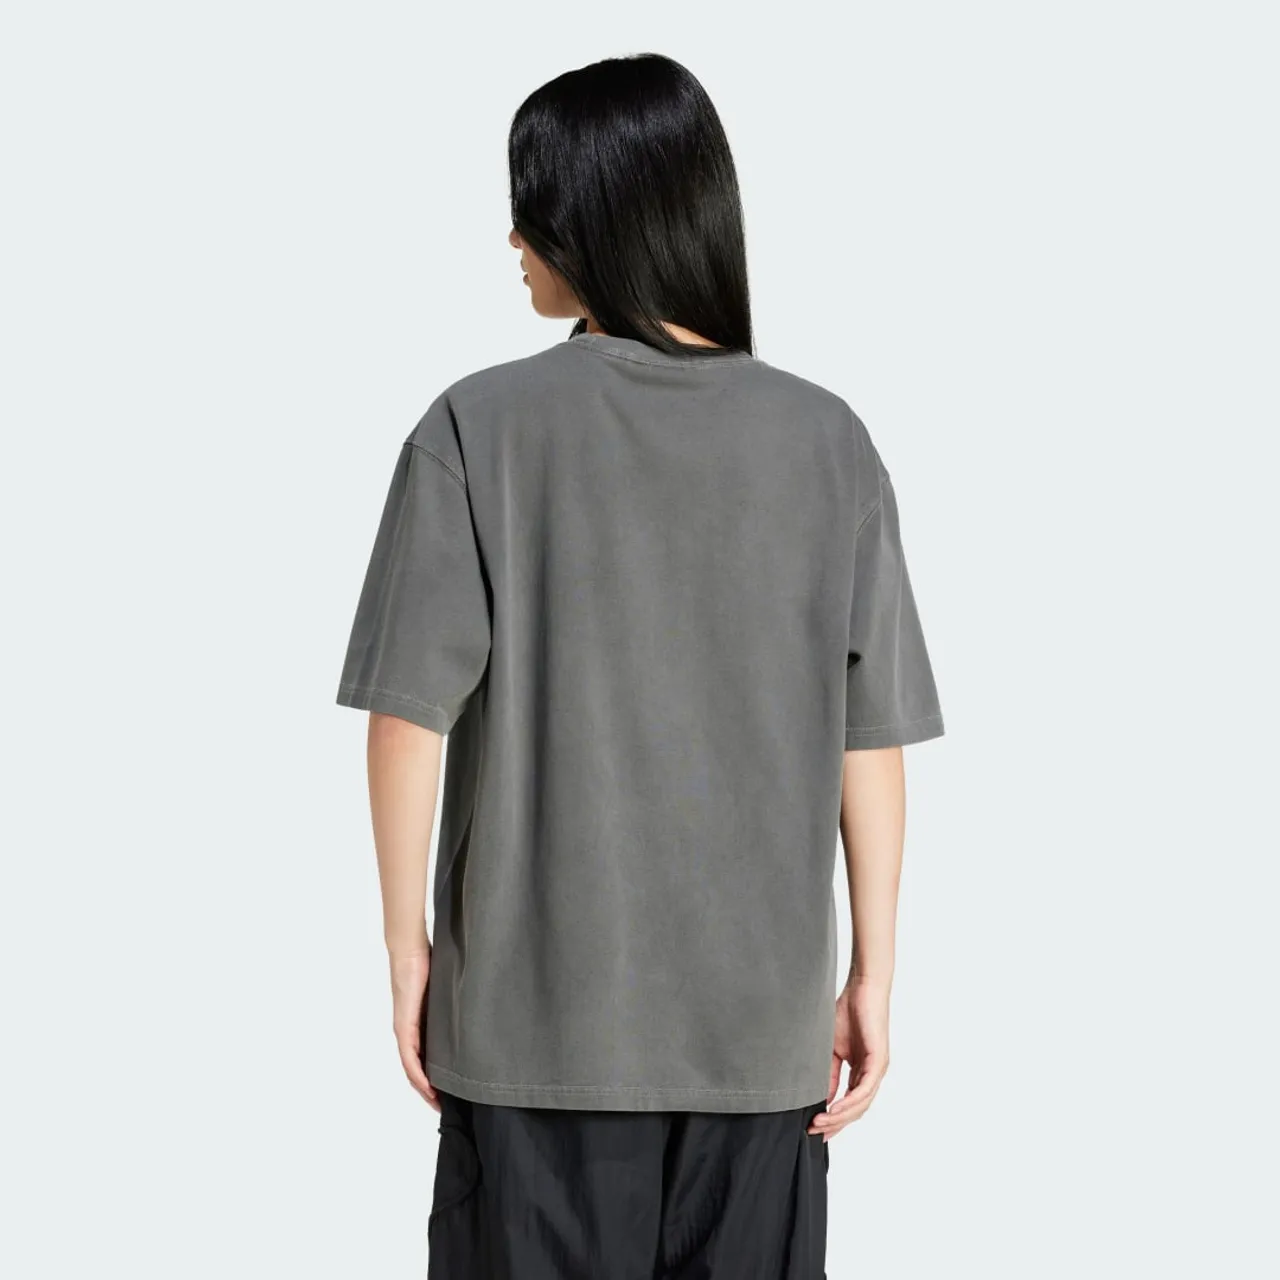 Washed Trefoil Tee